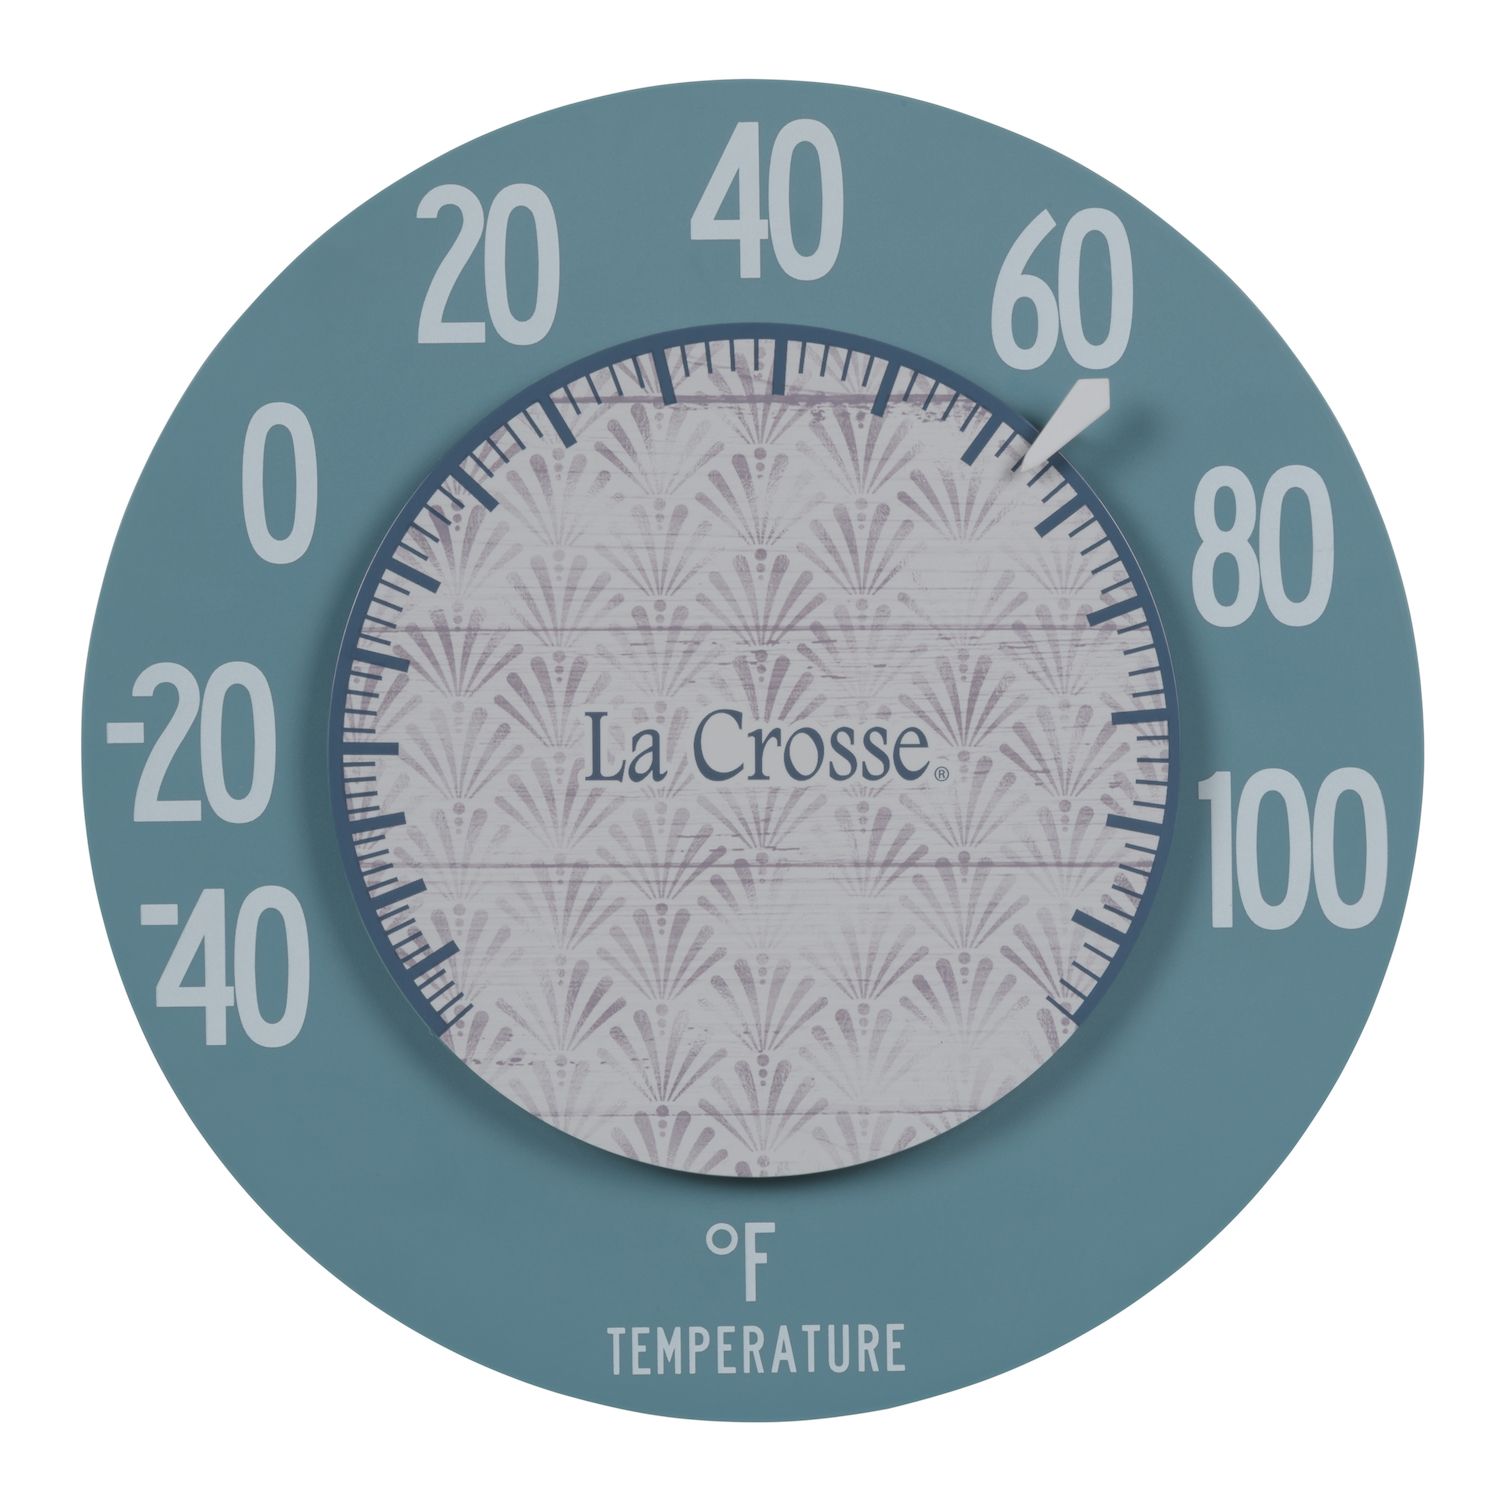 La Crosse Technology 5-In. Blue Analog Dial Bracket Thermometer